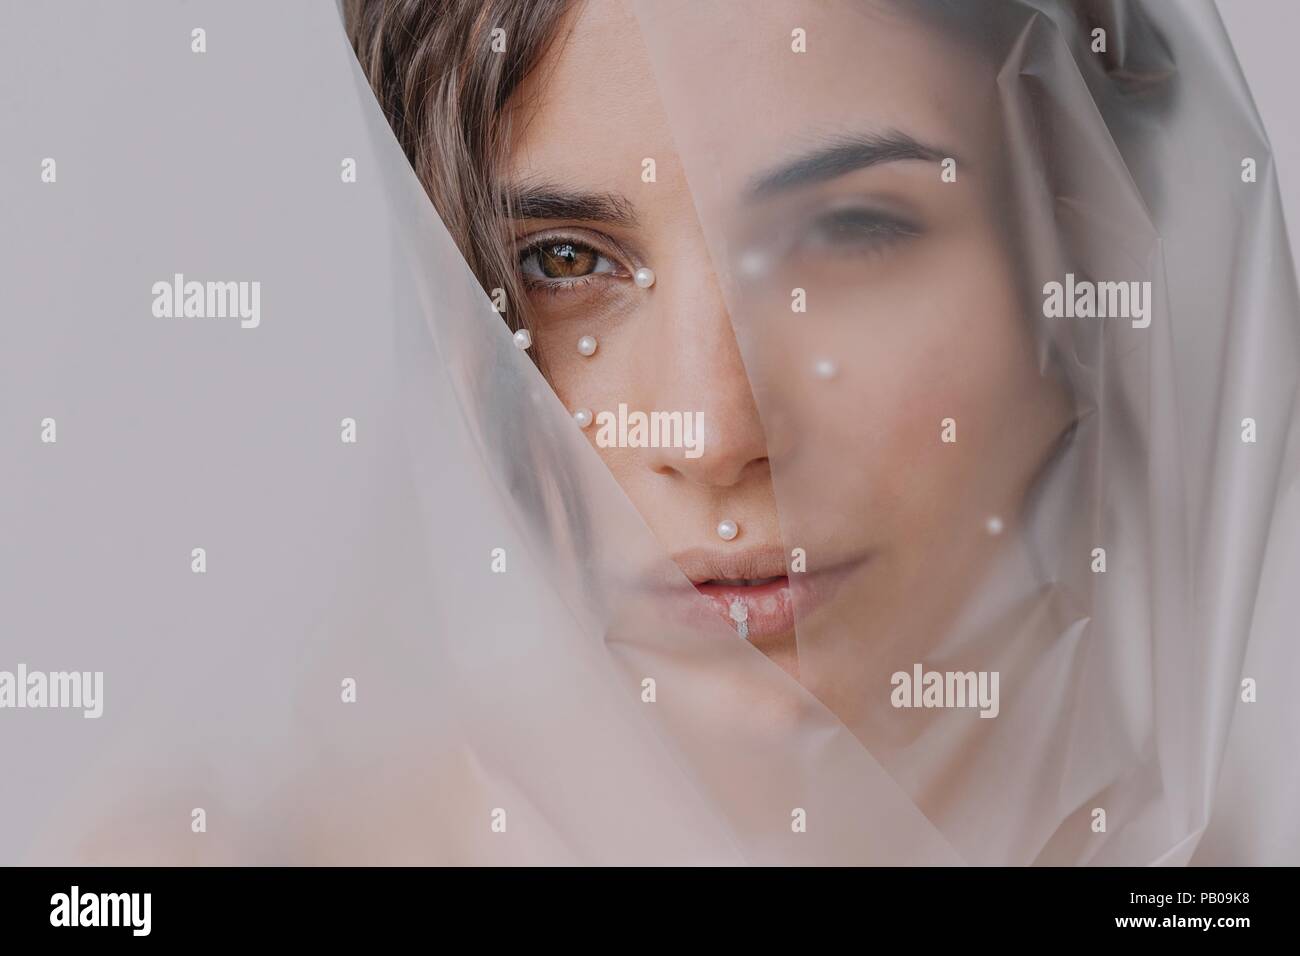 Portrait of a woman with pearls on her face Stock Photo